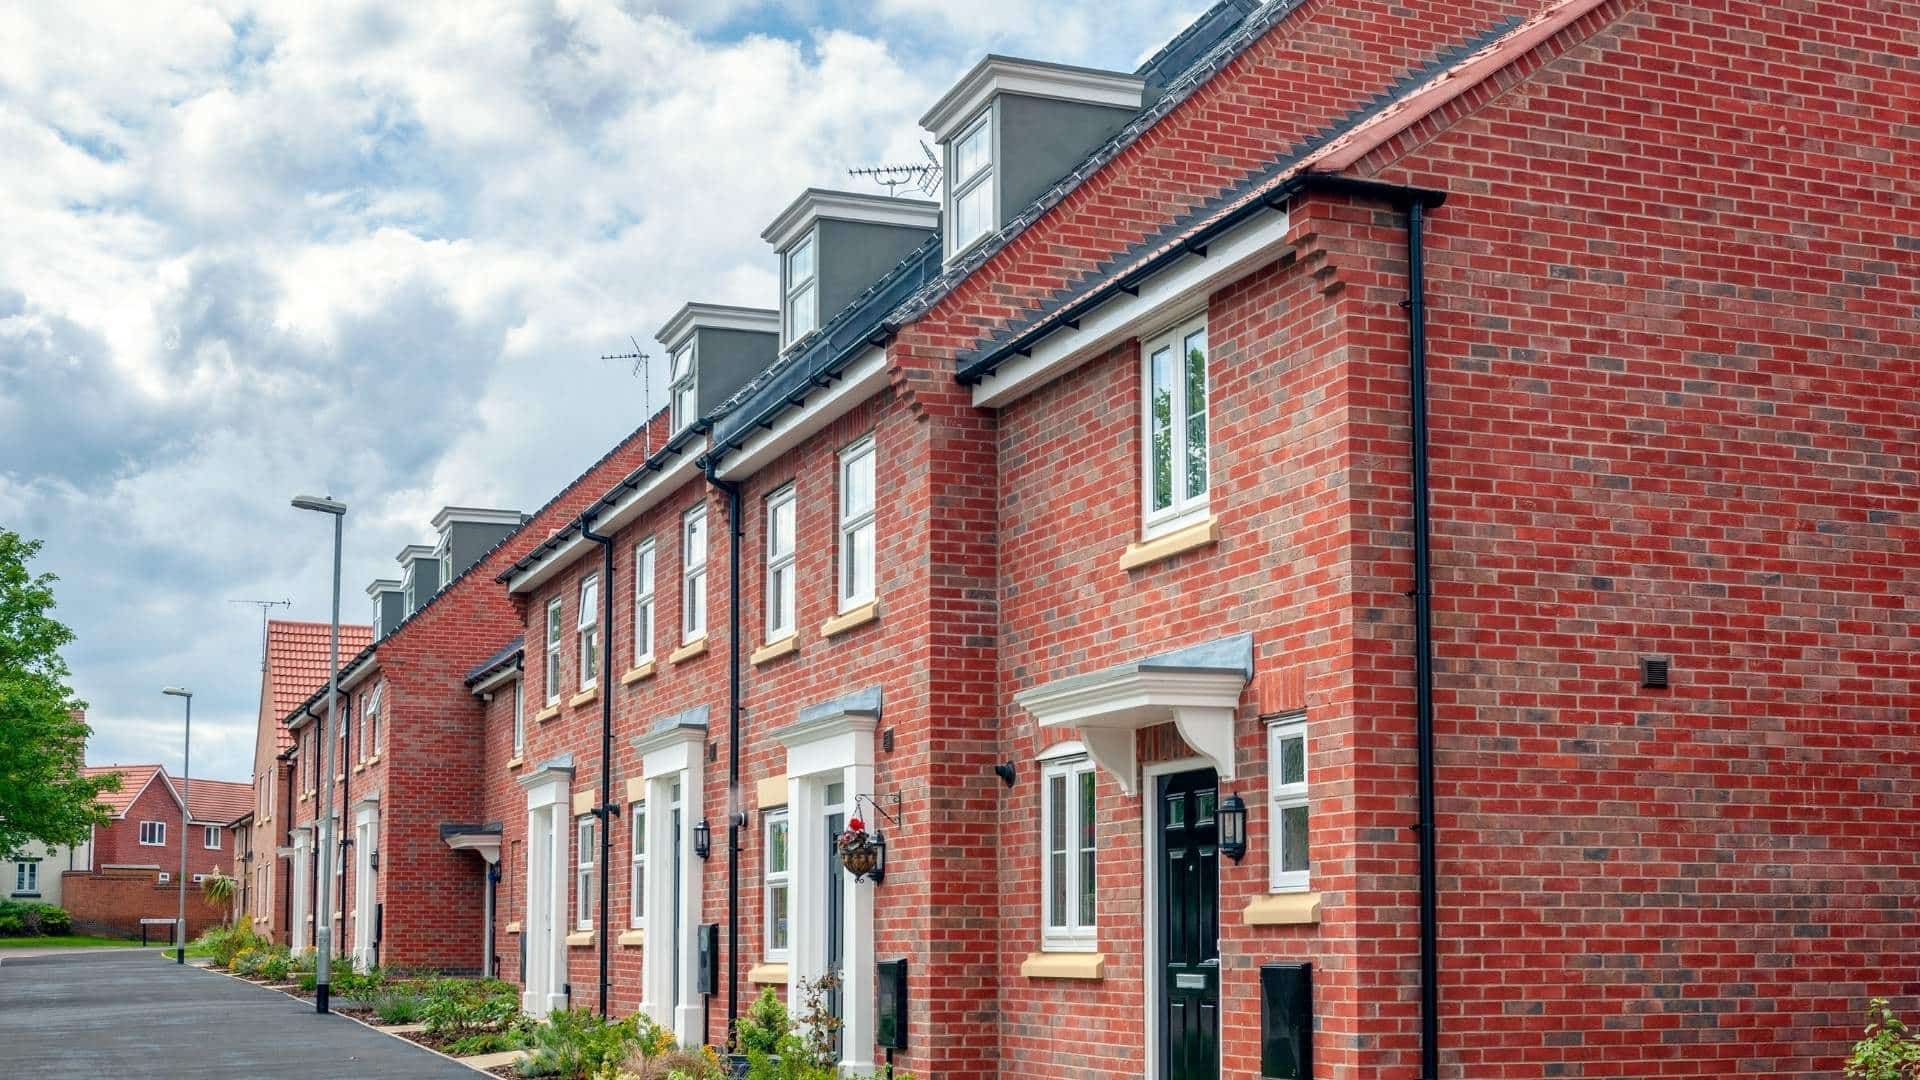 Should your next property investment be new?